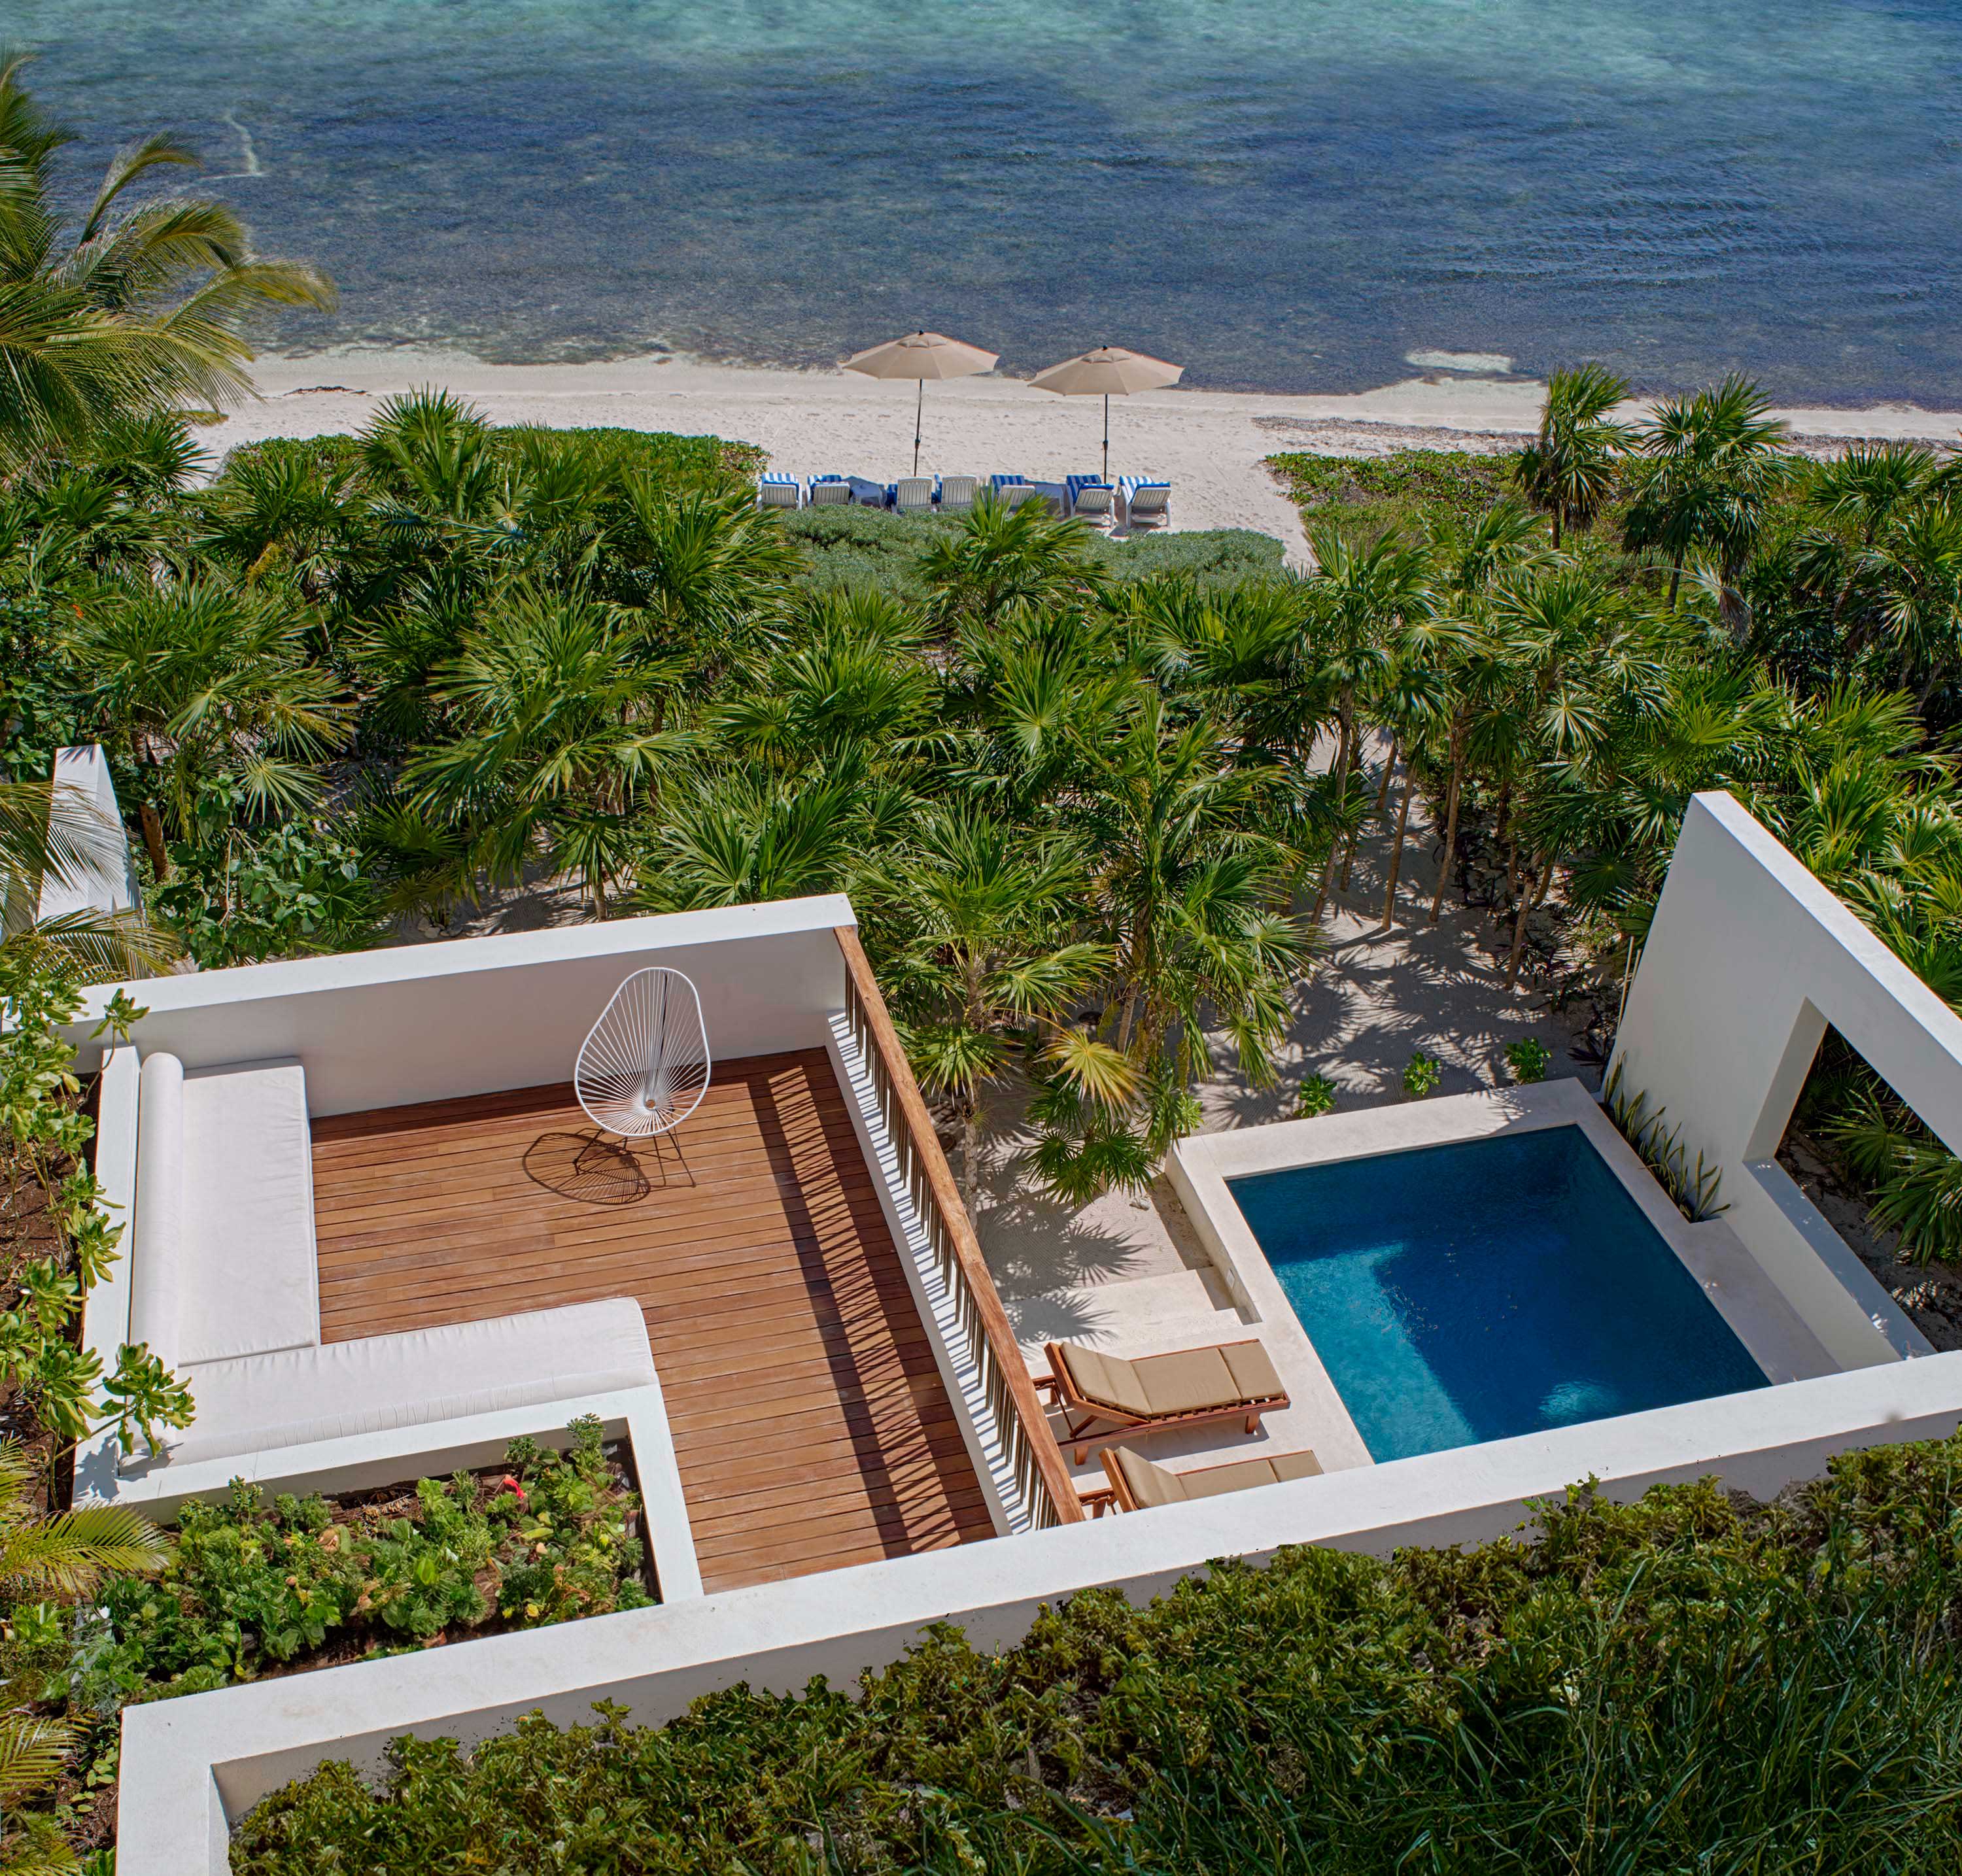 Exterior photo of Casa Xixim by Specht Novak Architects. Shot by Taggart Sorensen, featuring the pool, balcony, and structure of the home from above with view of the ocean.